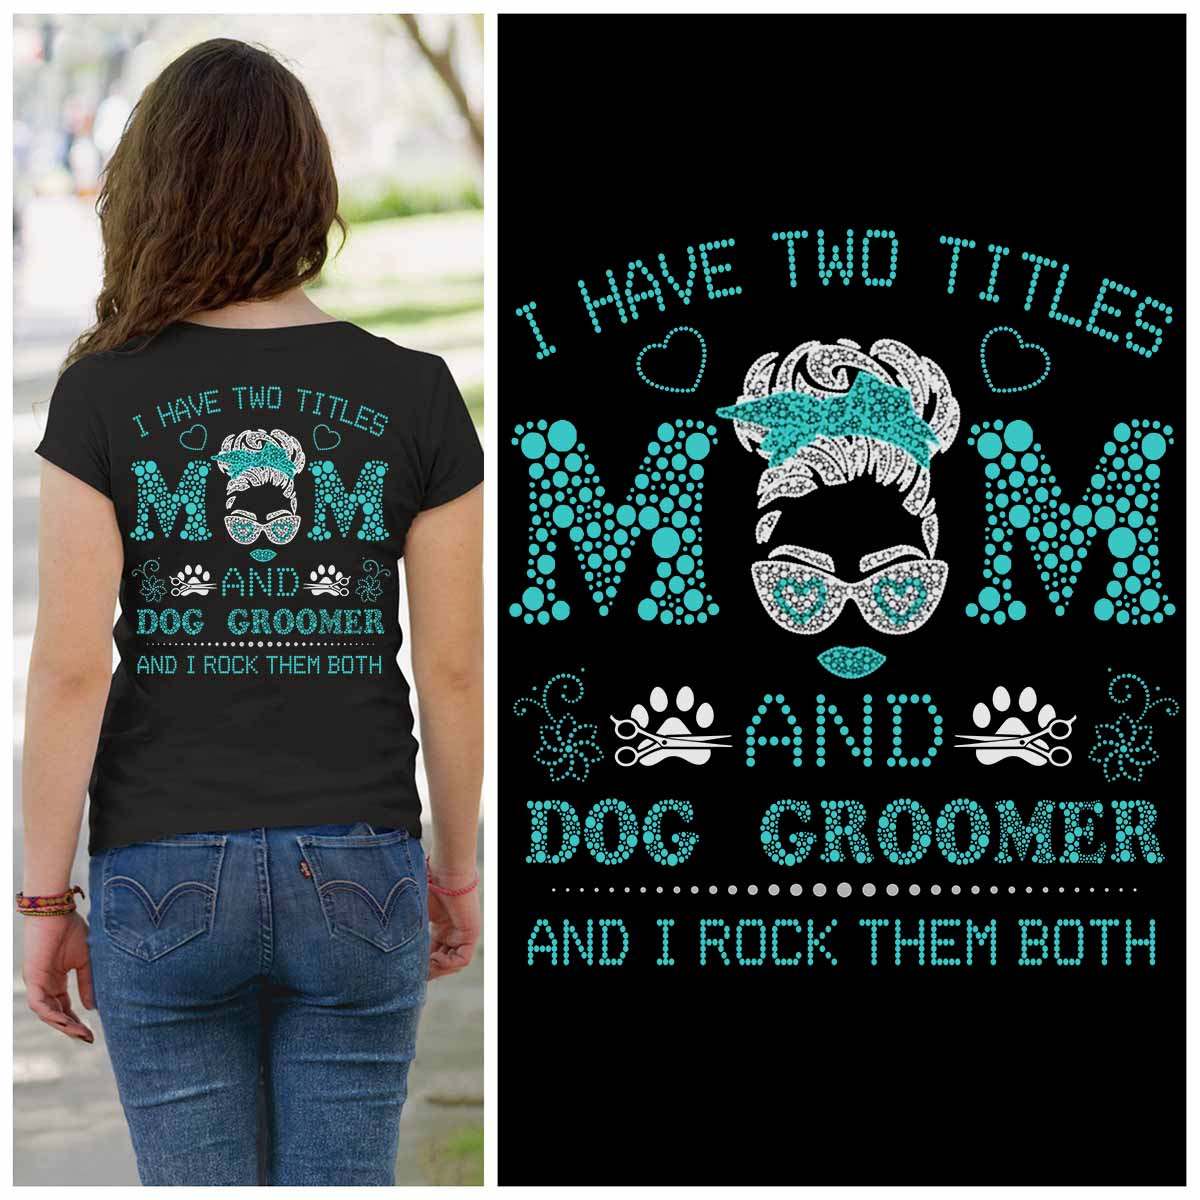 Dog Groomer Mom - I have two title mom and dog groomer and i rock them both